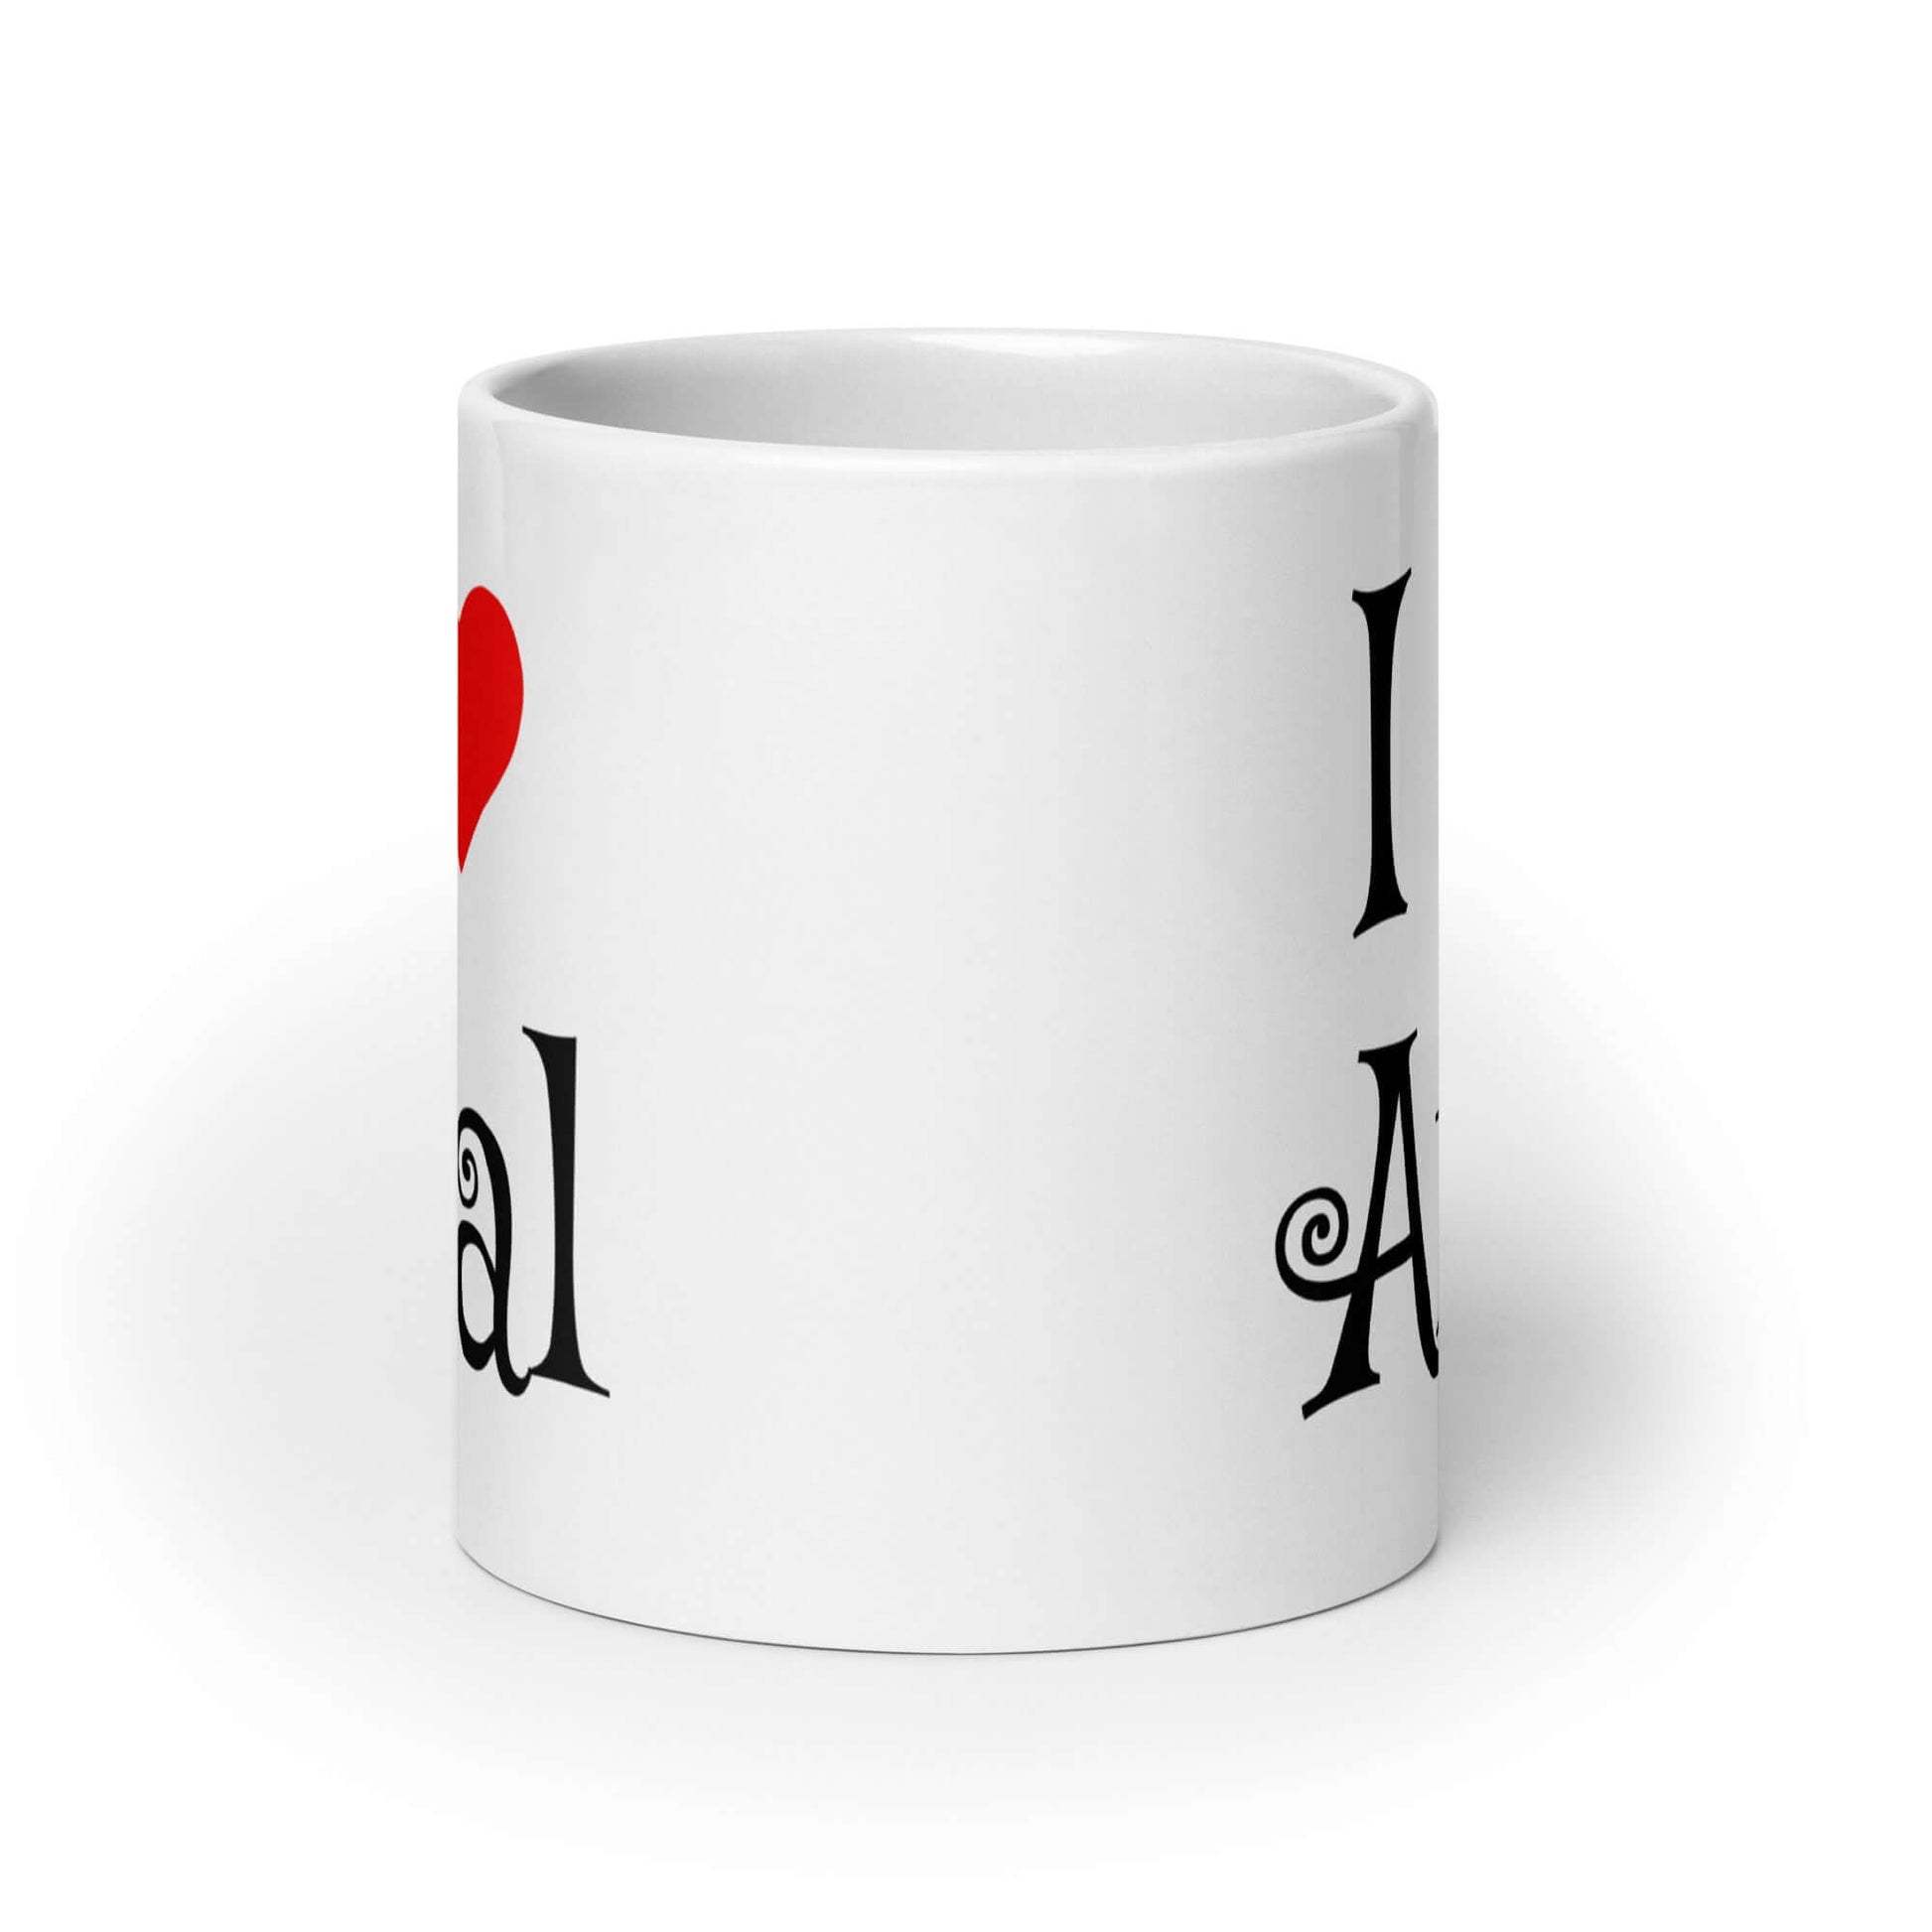 White ceramic coffee mug with the words I heart anal printed on both sides. The heart is red.